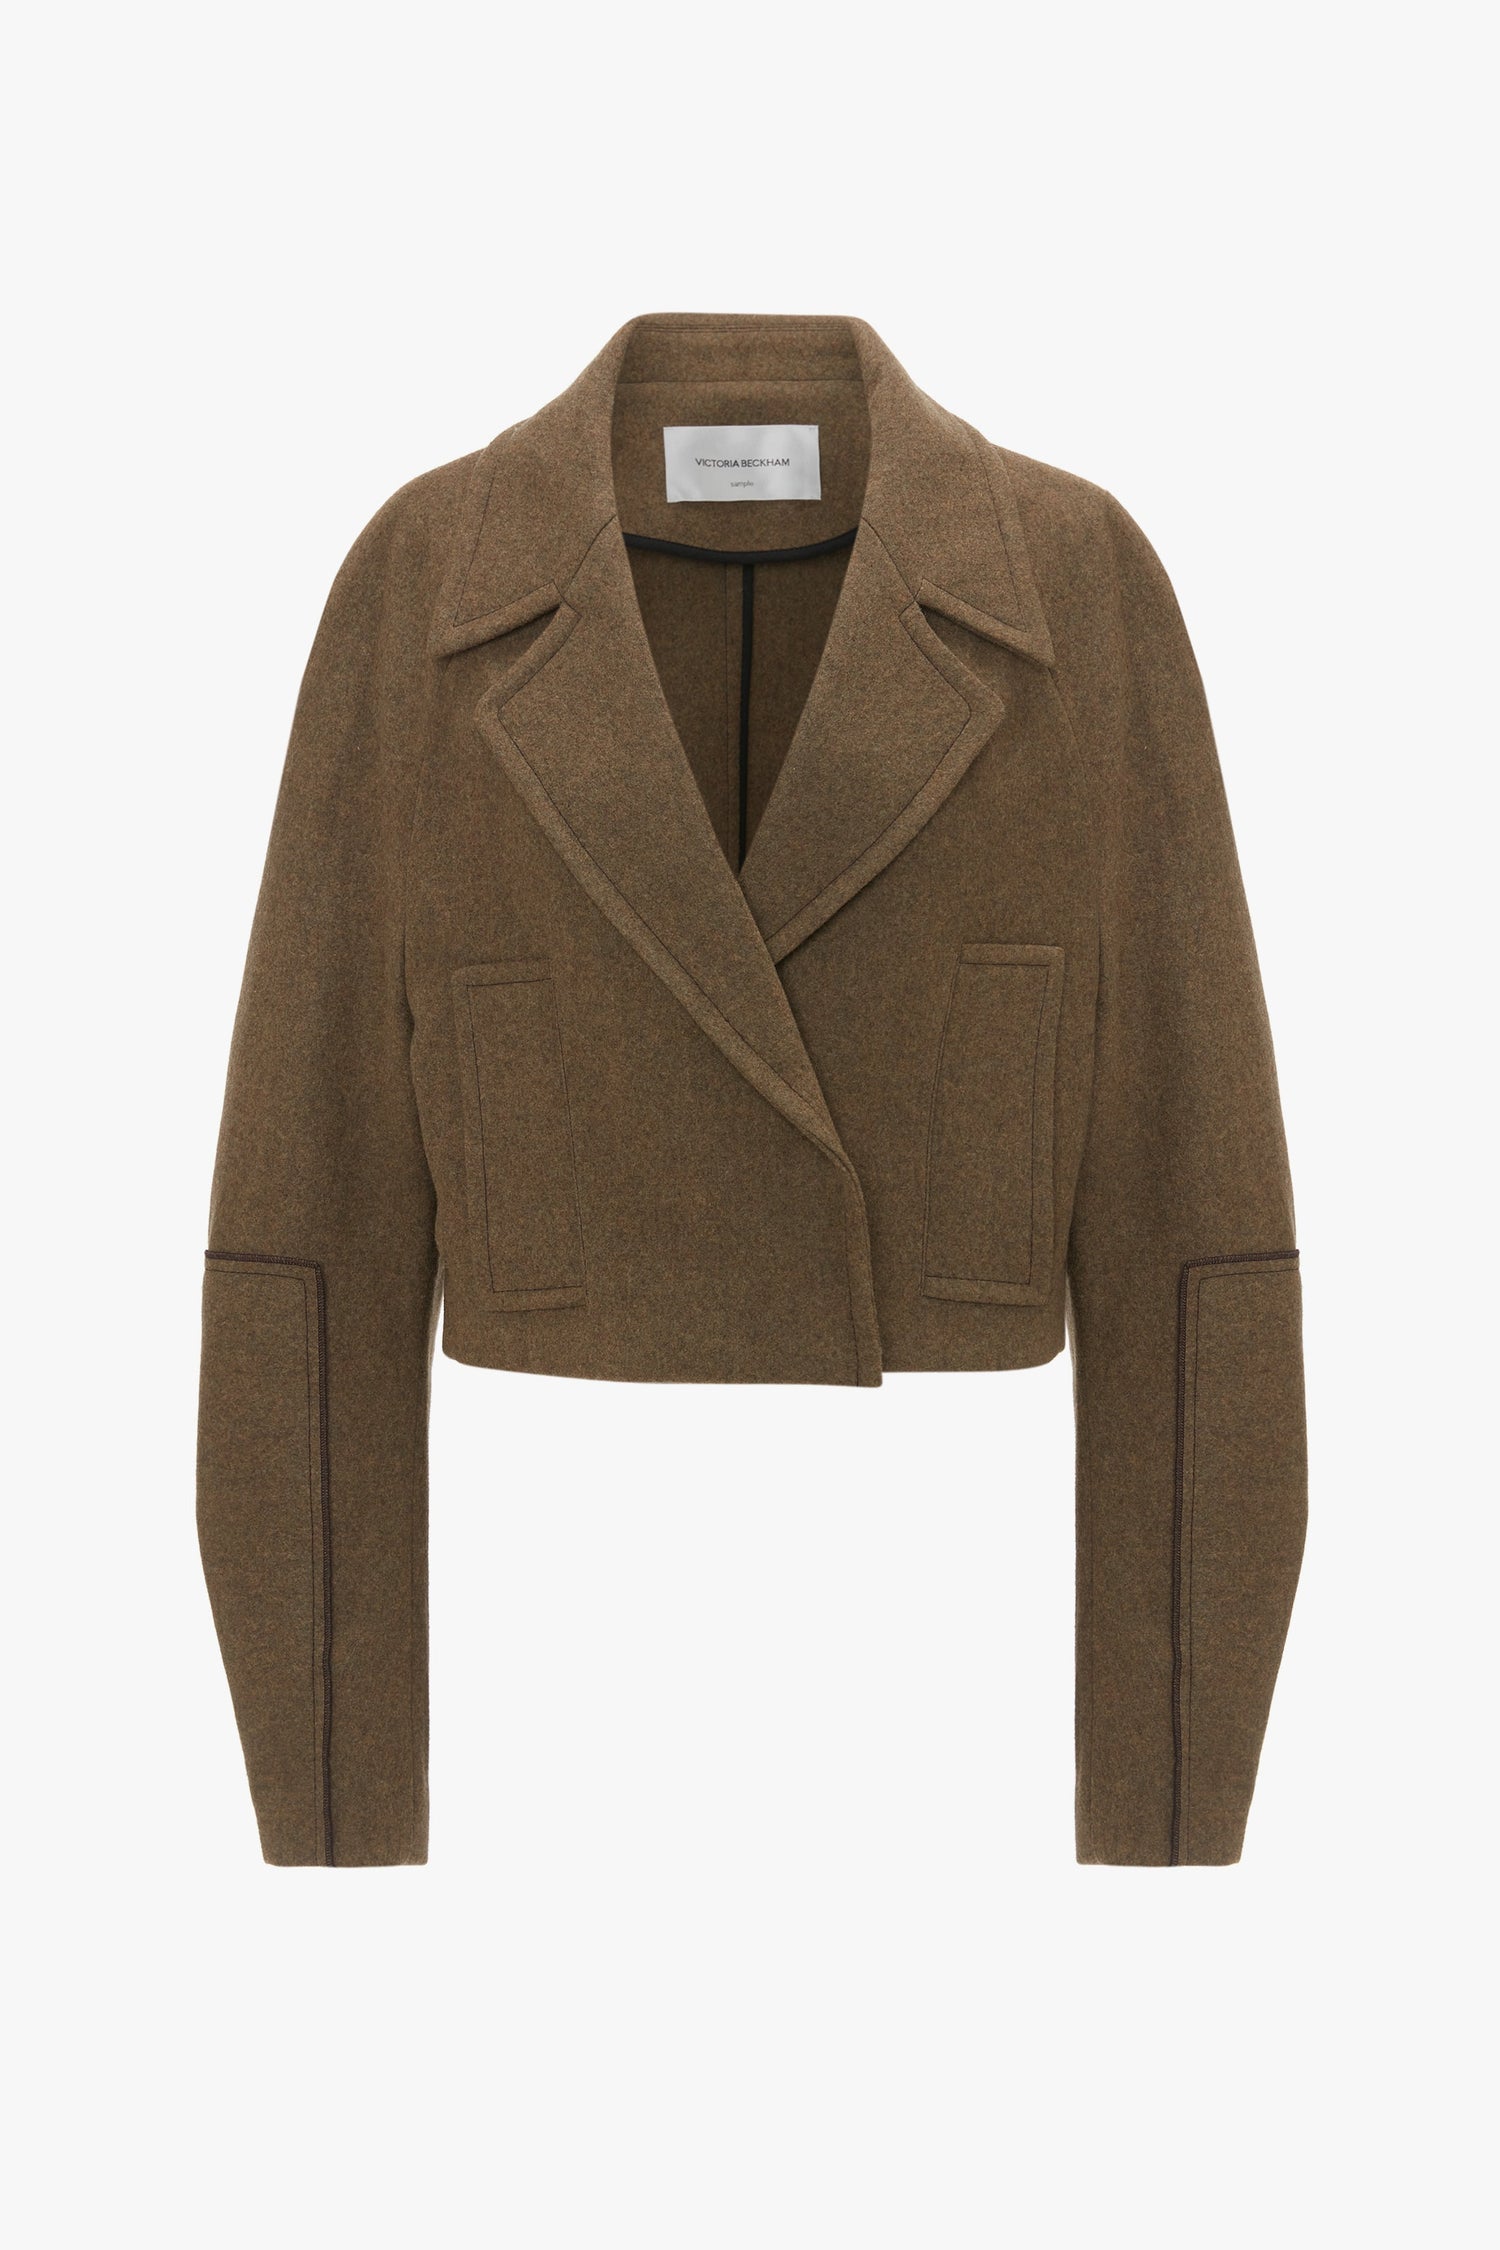 A brown, cropped peacoat crafted from merino wool with long sleeves, a wide lapel collar, and a double-breasted design featuring two front pockets has been replaced with the Victoria Beckham Cropped Pea Coat In Khaki.